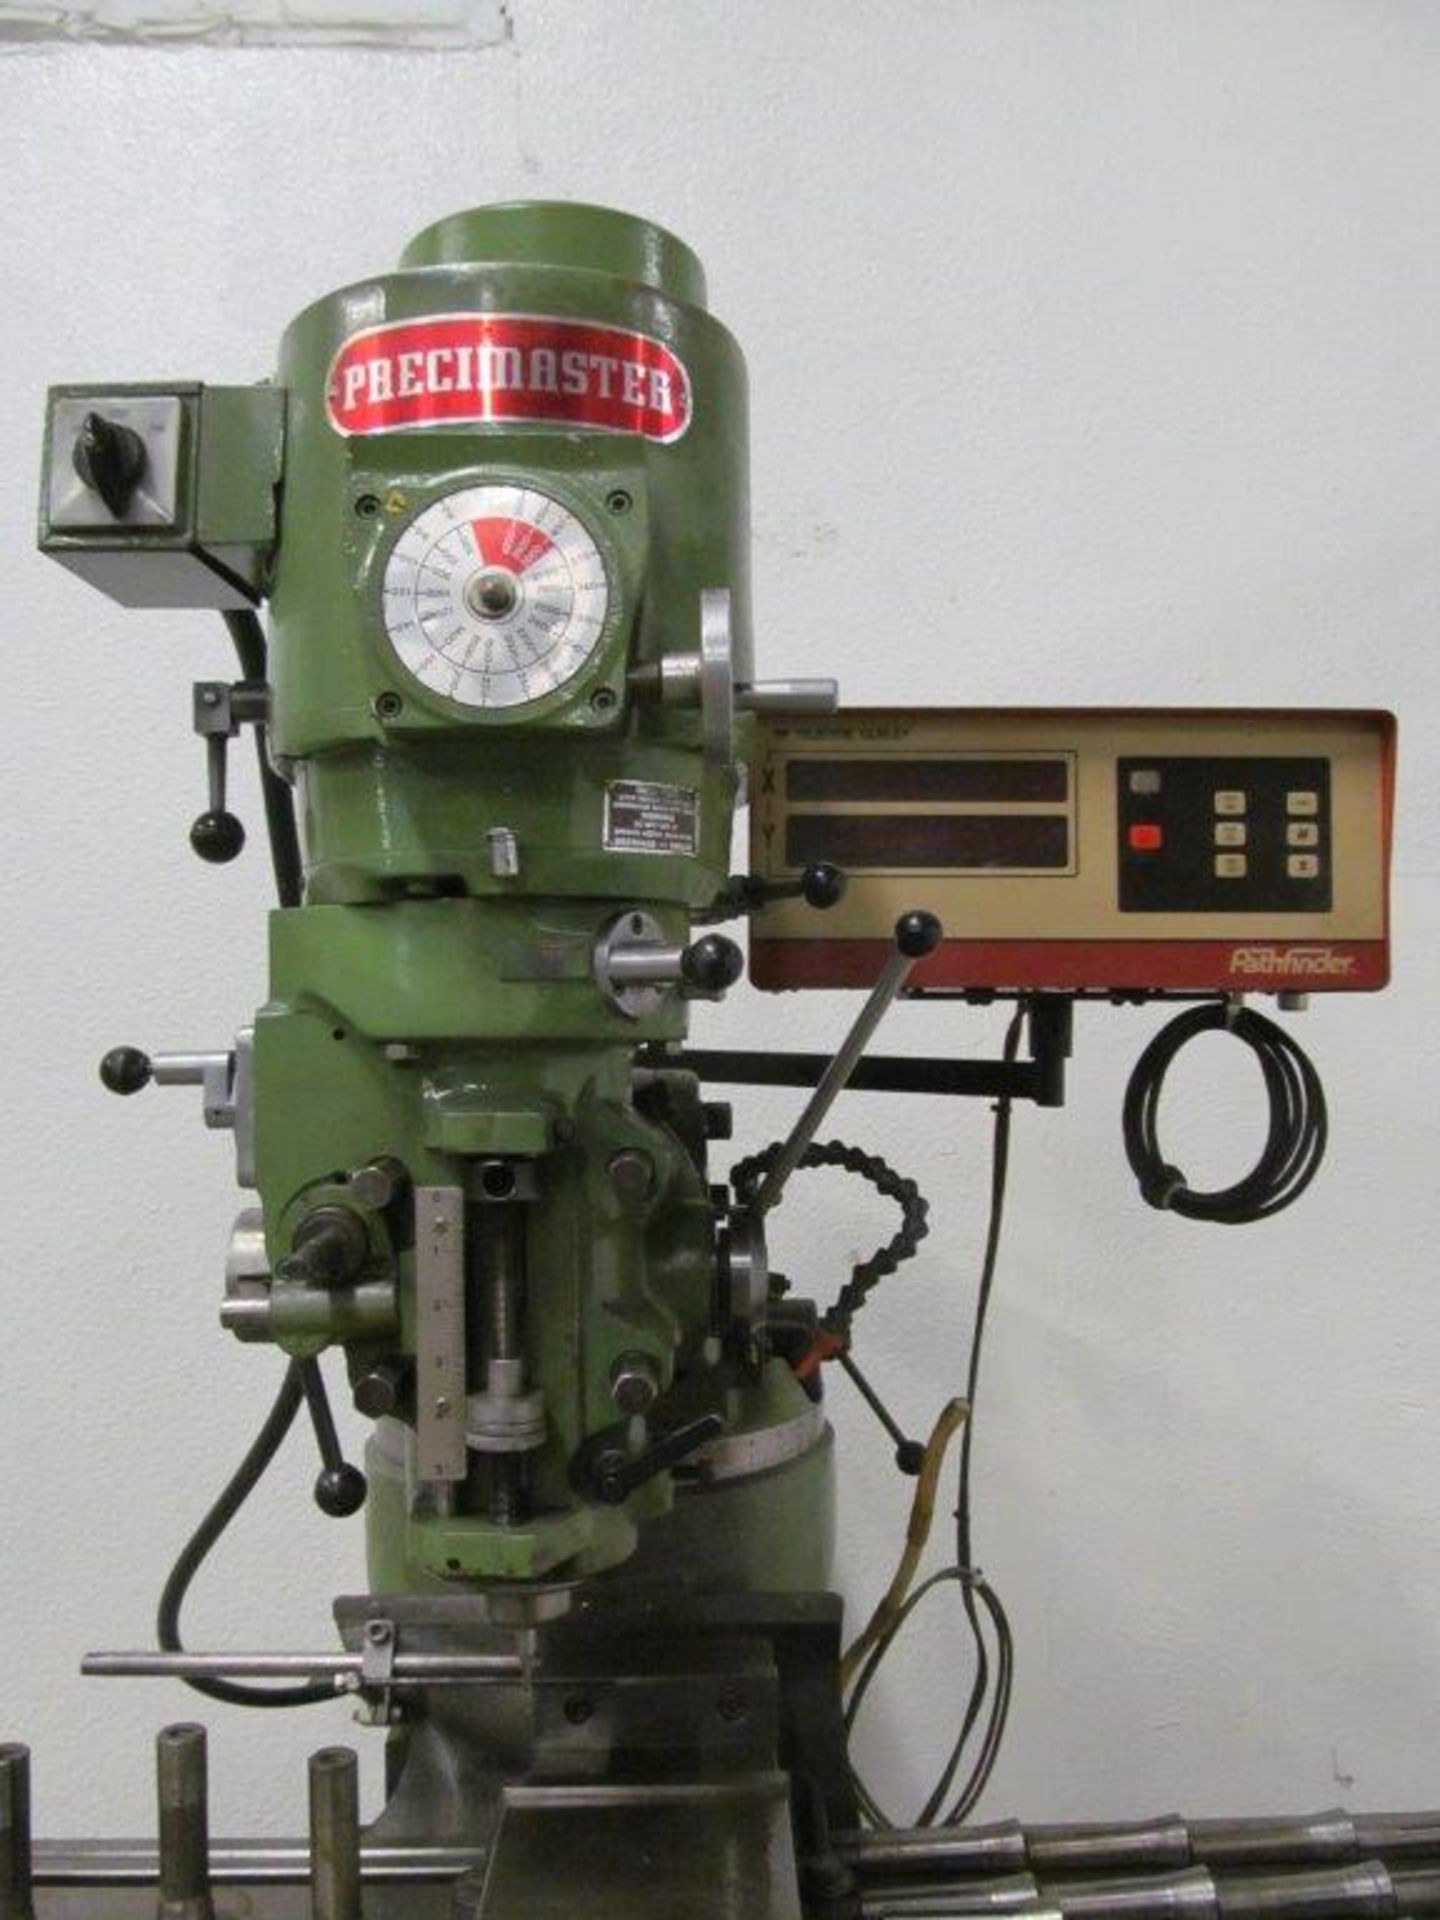 PRECIMASTER VERTICAL TURRET MILL, VARIABLE SPEED, MODEL: 2VS, S/N: 01015R, TABLE: 9" X 48", C/W DRO, - Image 5 of 5